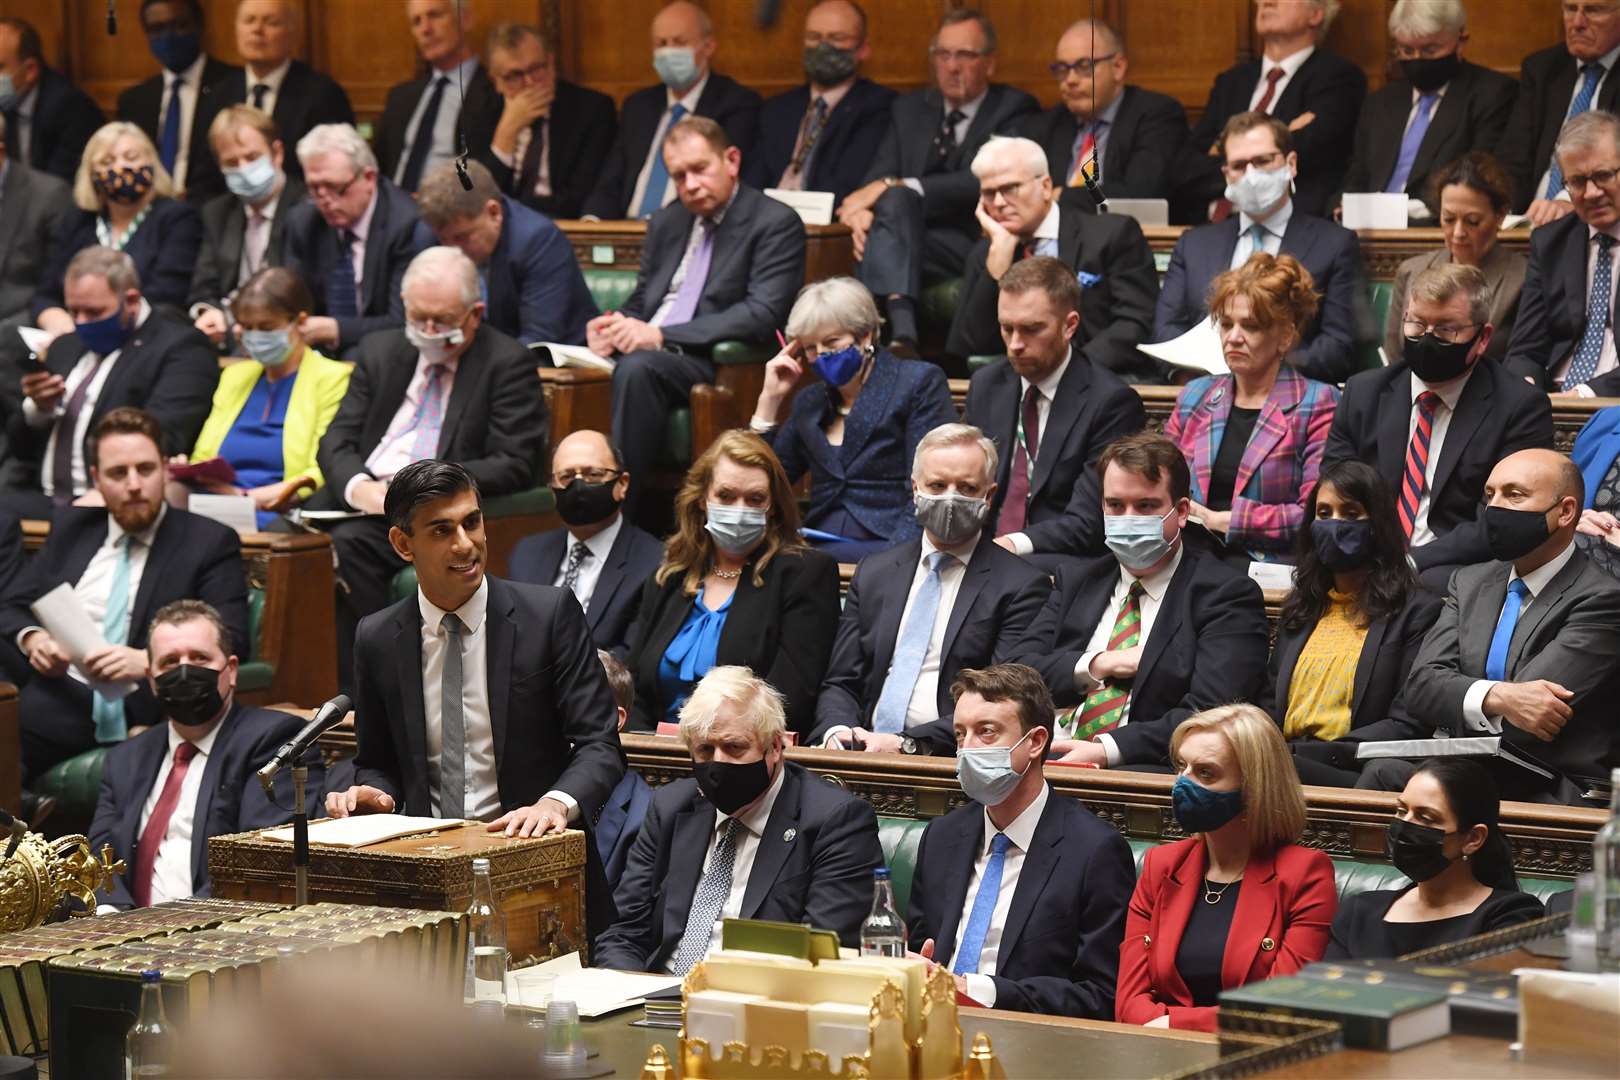 MPs listen to Rishi Sunak deliver his Budget speech (UK Parliament/PA)